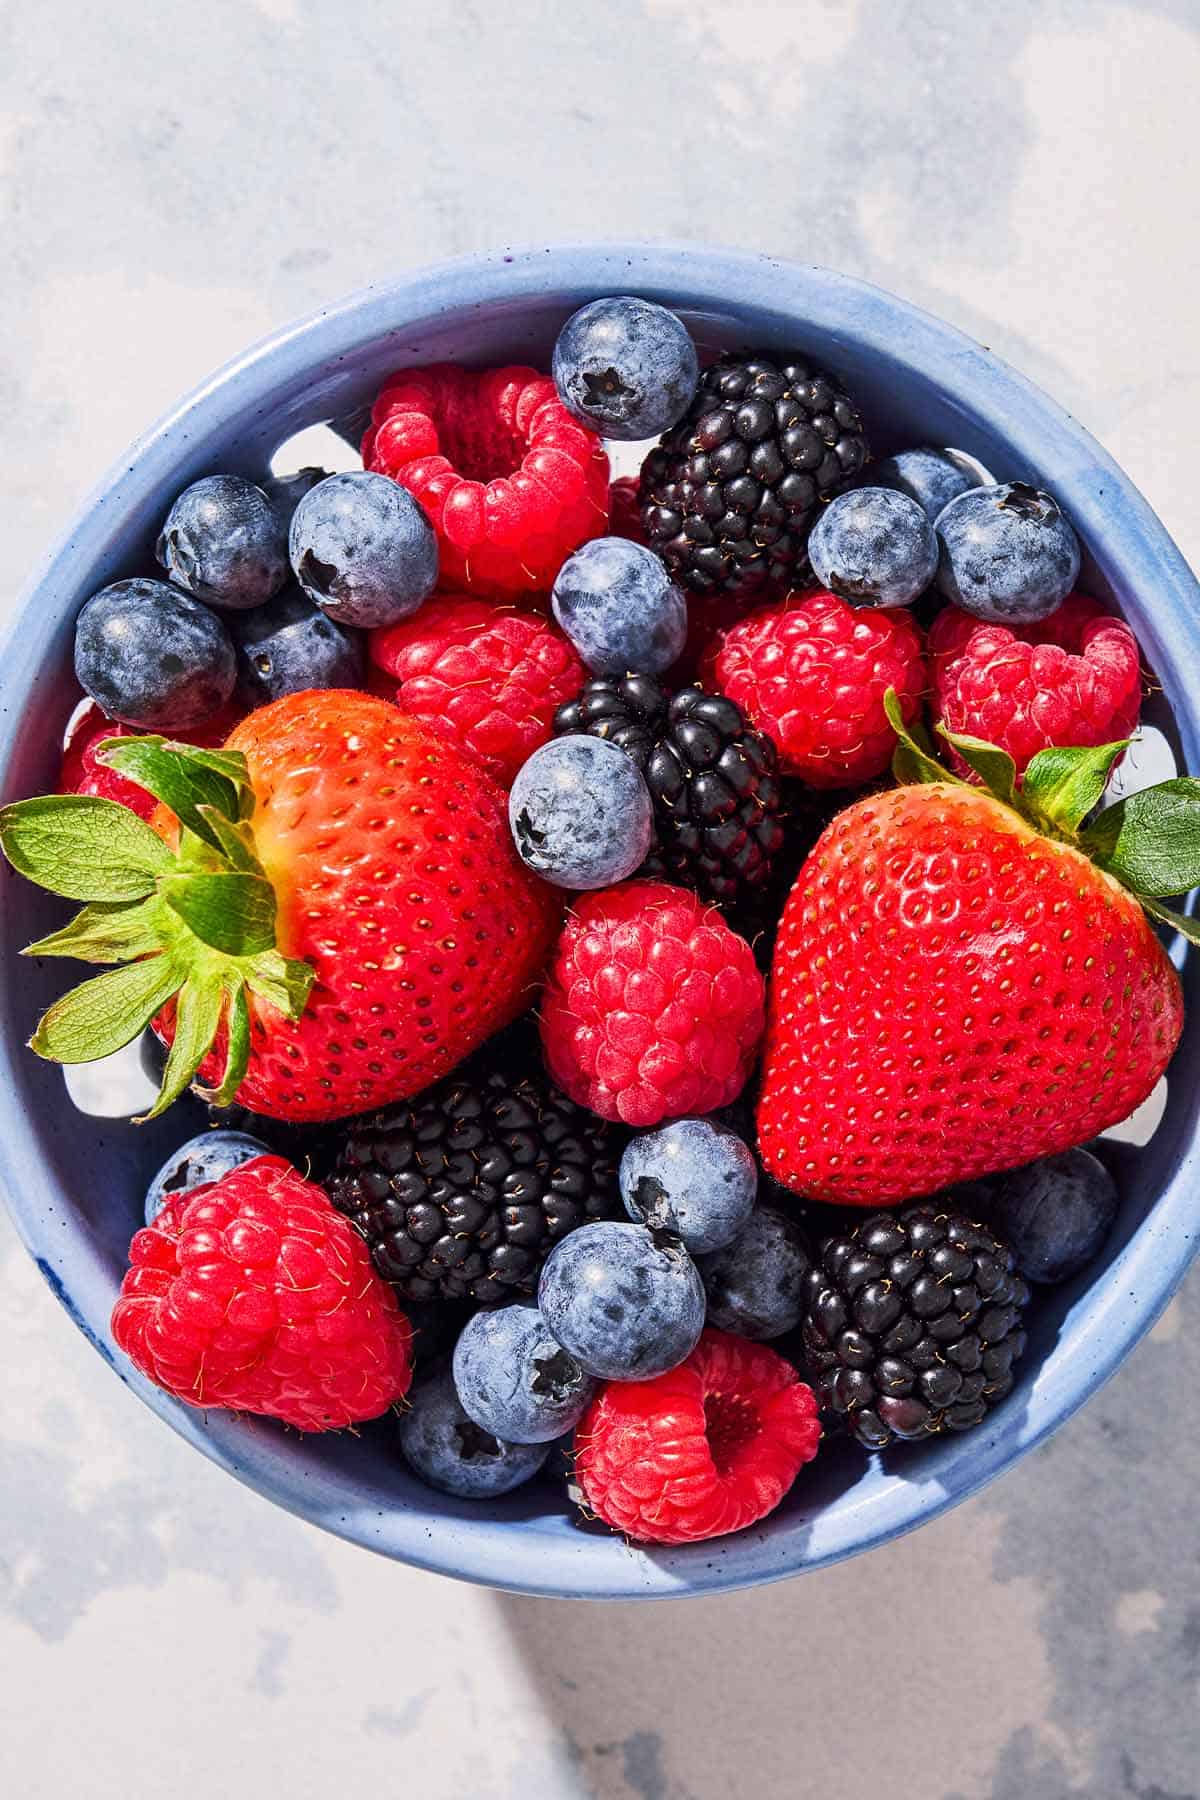 A close up of a blueberries, blackberries and strawberries in a bowl.